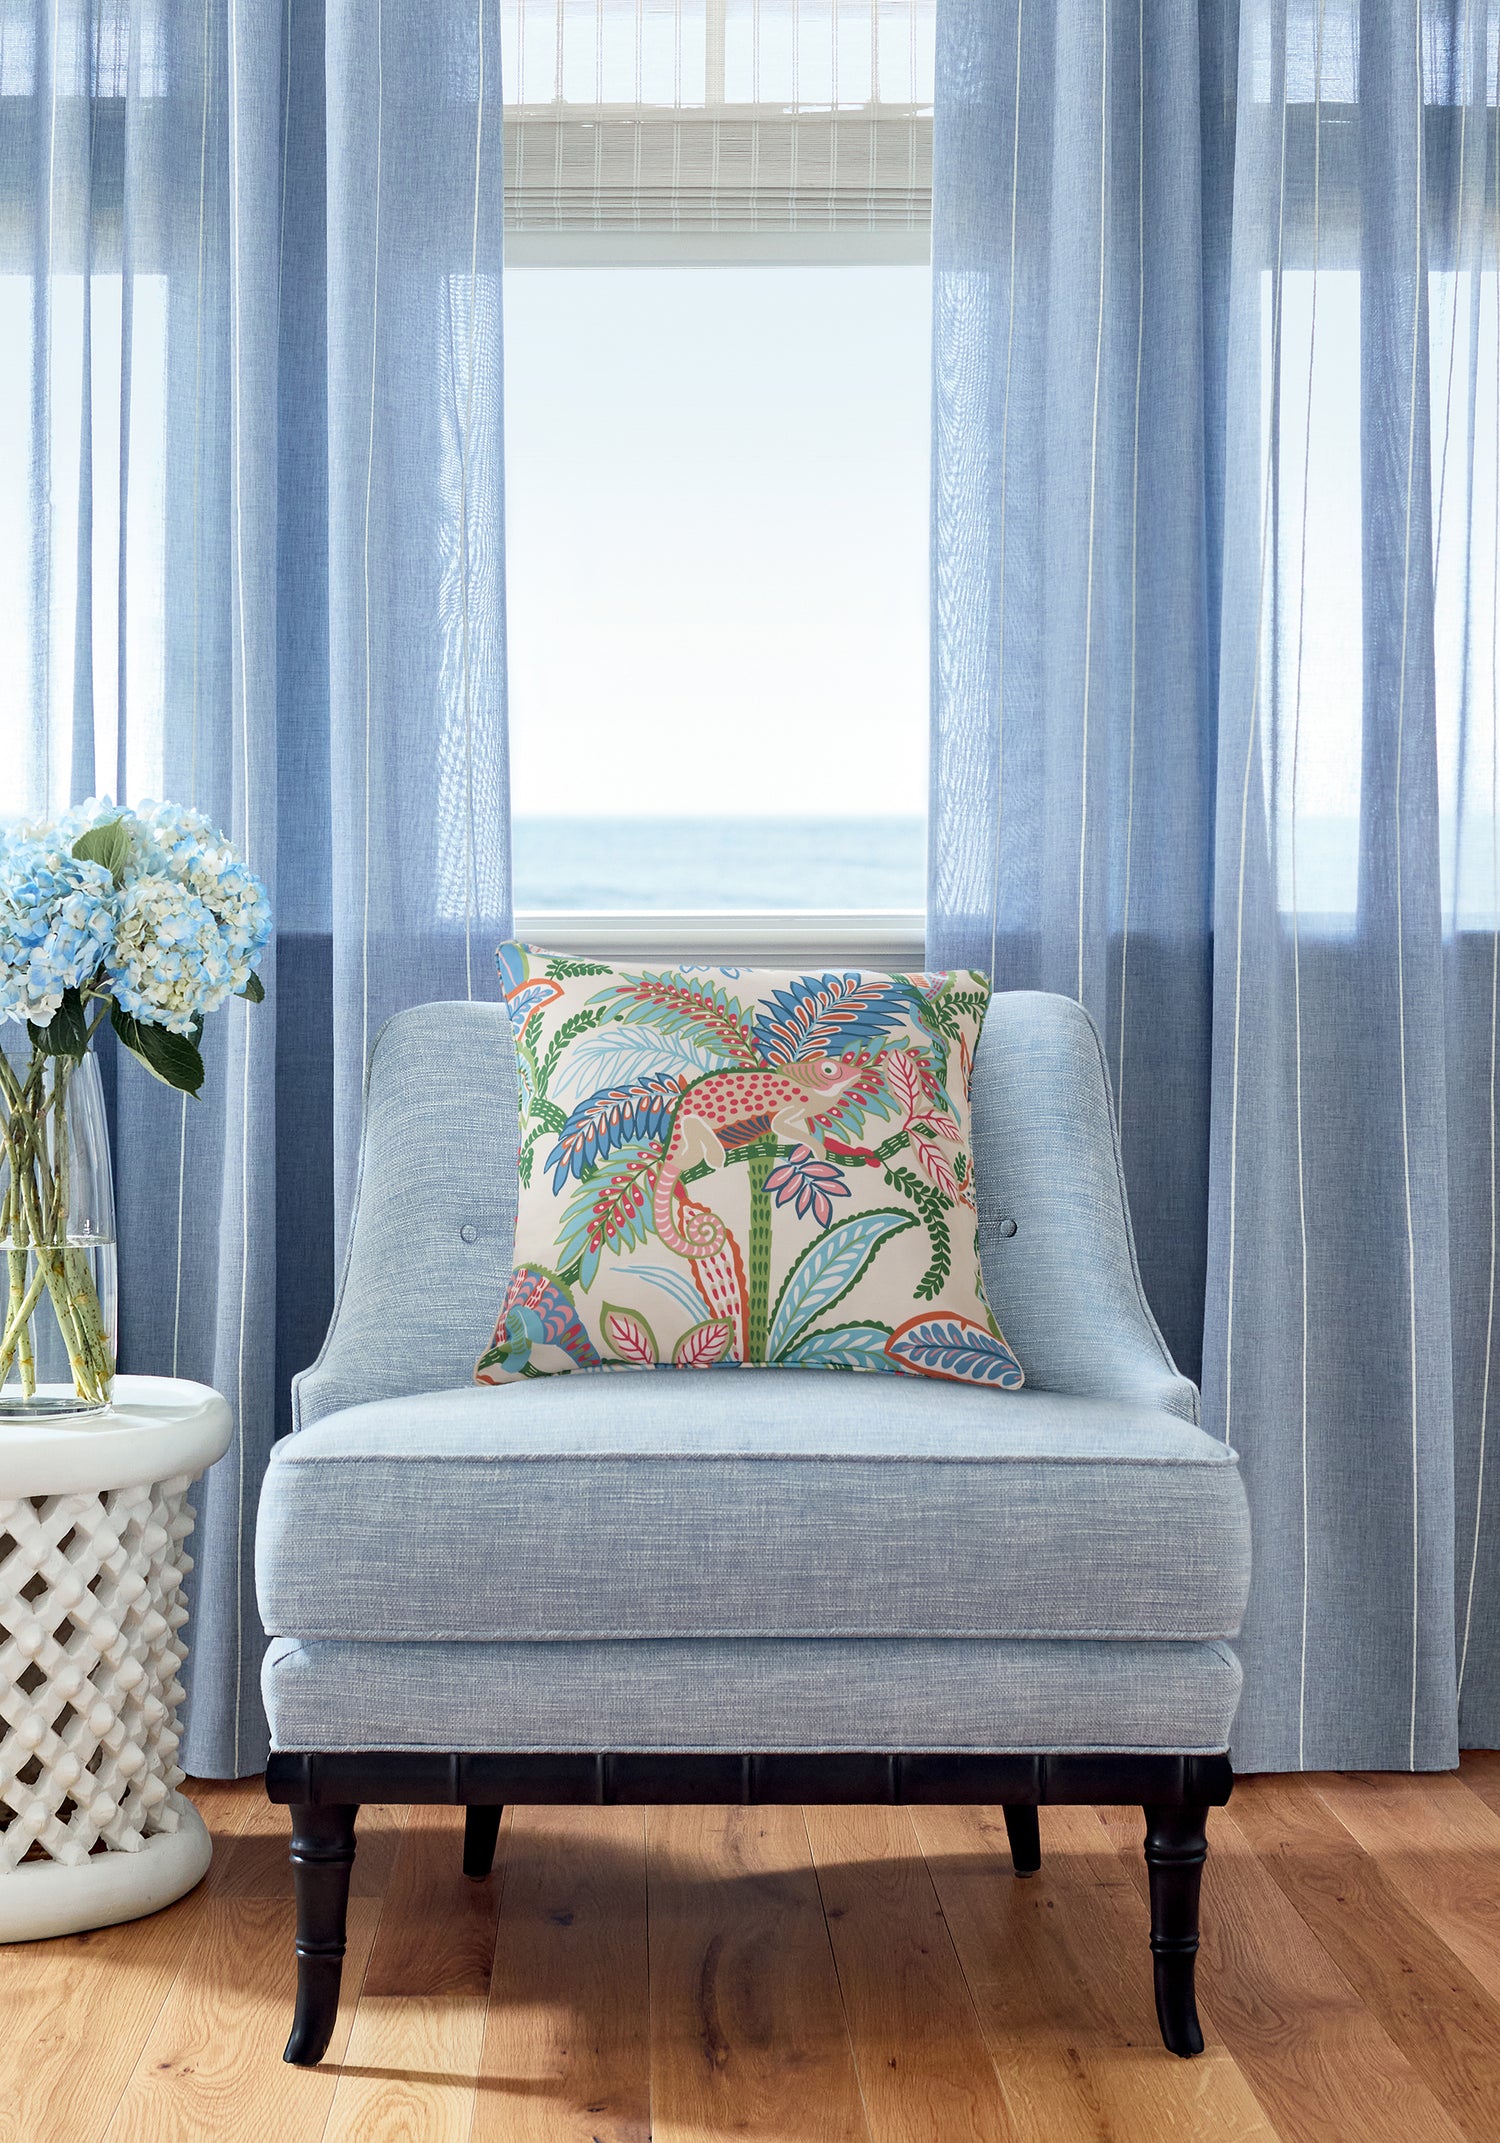 Pillow in Iggy fabric in island color - pattern number F81672 - by Thibaut in the Locale collection. Also pictured - Brentwood Chair in Finley woven fabric in Chambray